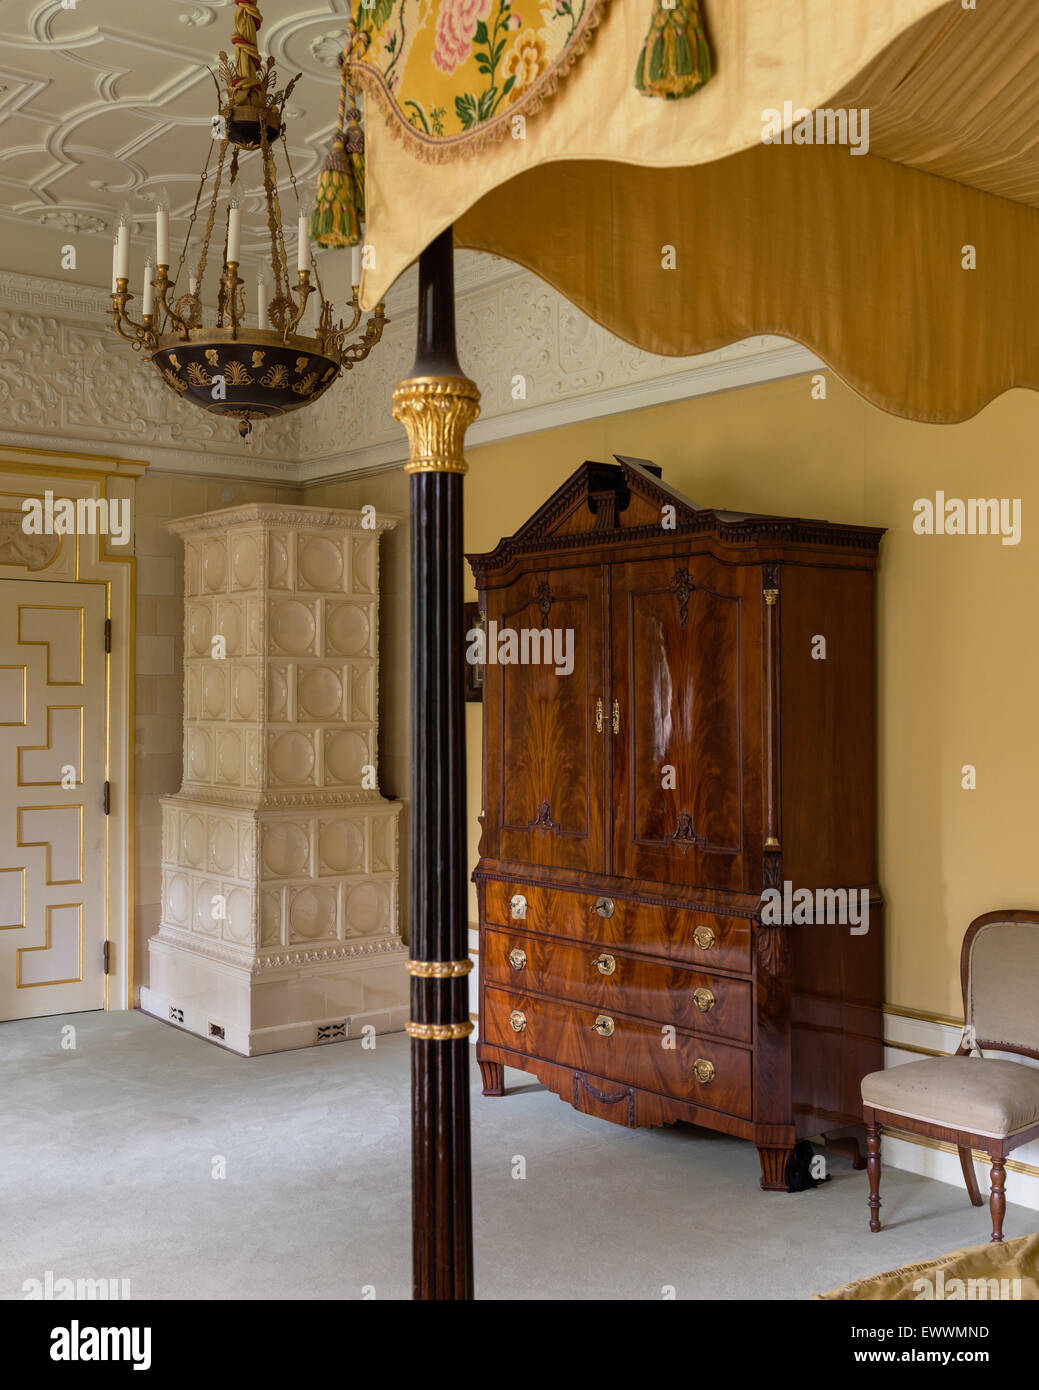 Antique armoire in bedroom with tiled stove, stucco ceiling and four poster bed Stock Photo